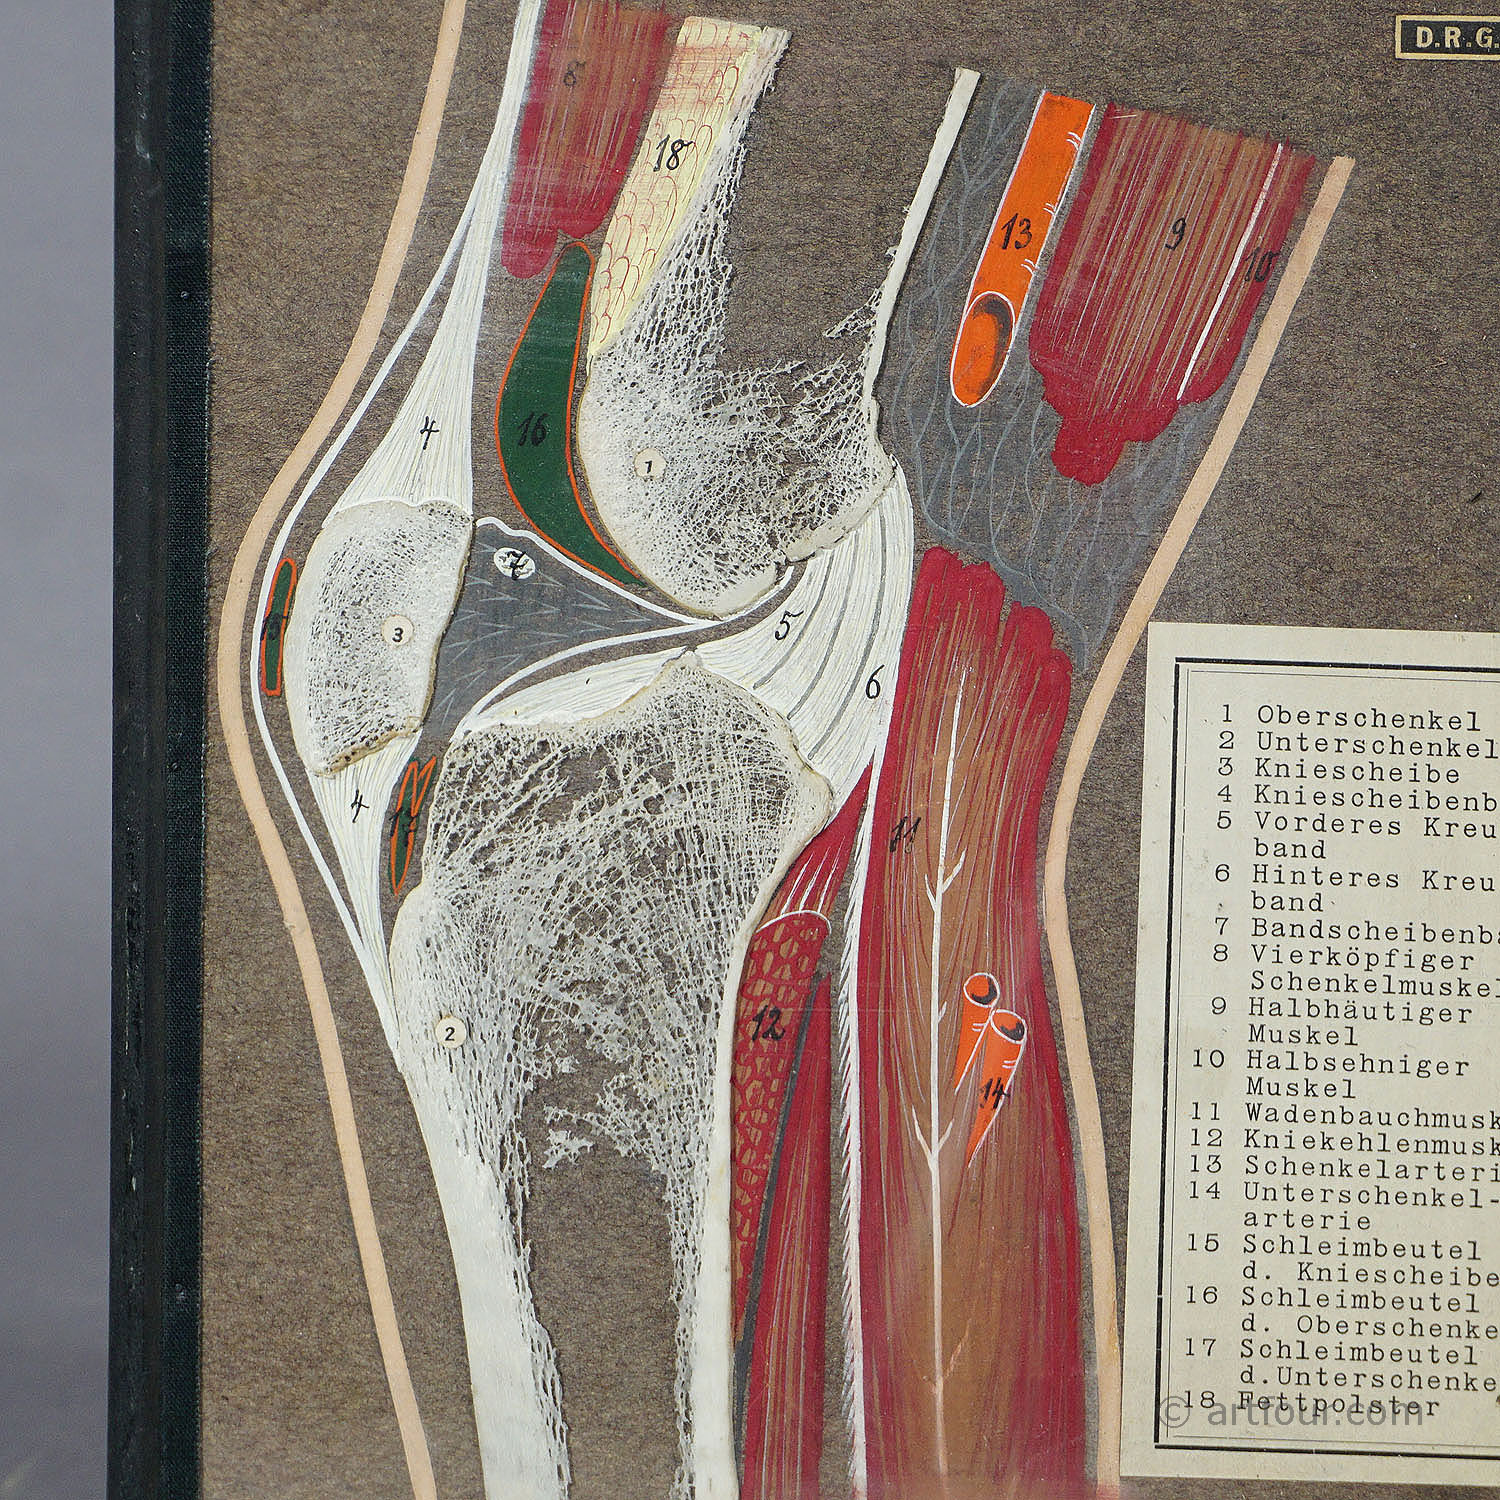 Antique Scientific Demonstration Model - Bone Cut of the Human Knee Joint